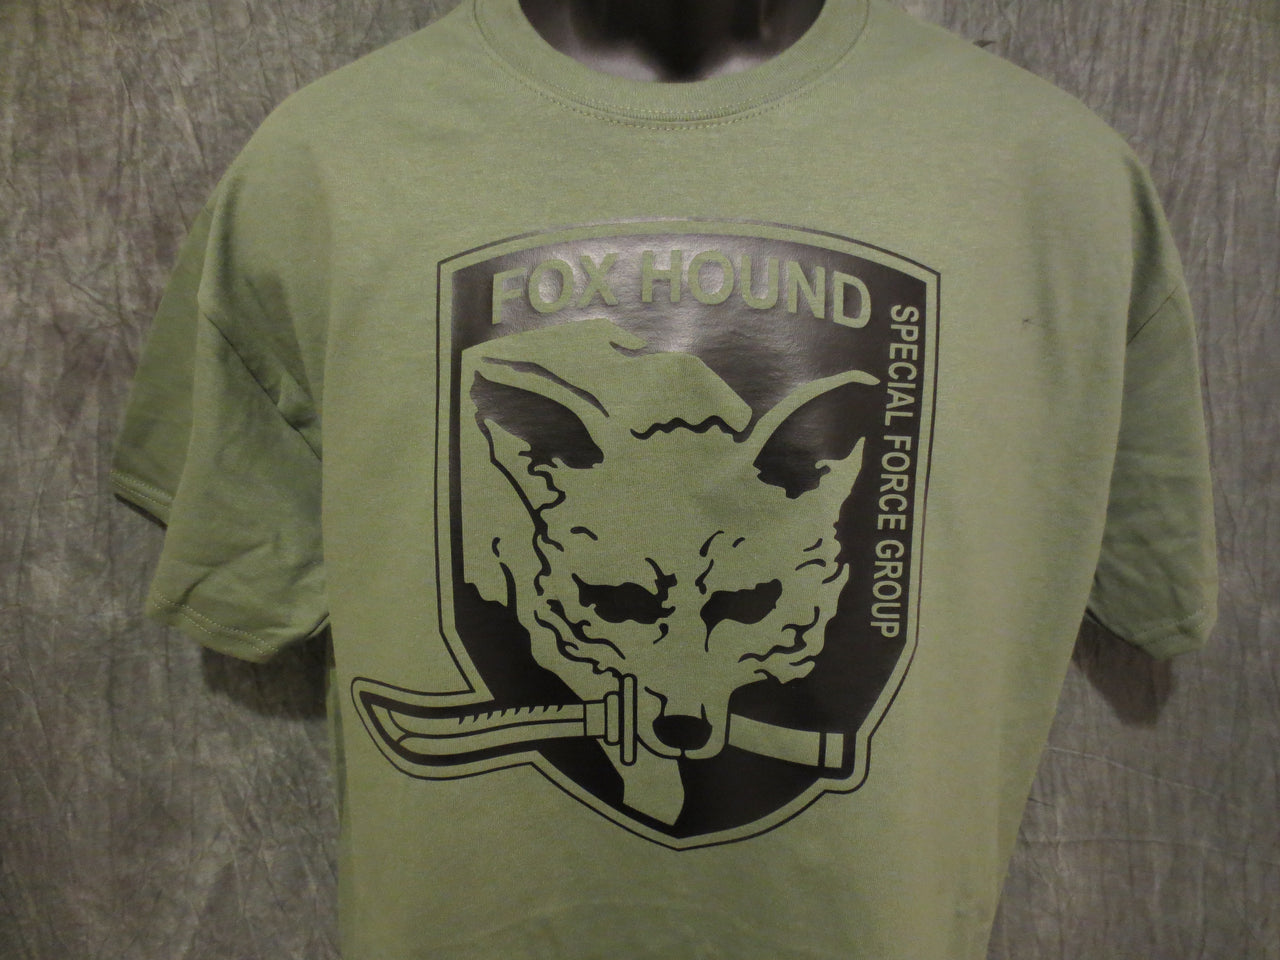 Metal Gear Solid Fox Hound Special Force Group Tshirt: Military Army O.D. Green With Black  Print - TshirtNow.net - 1